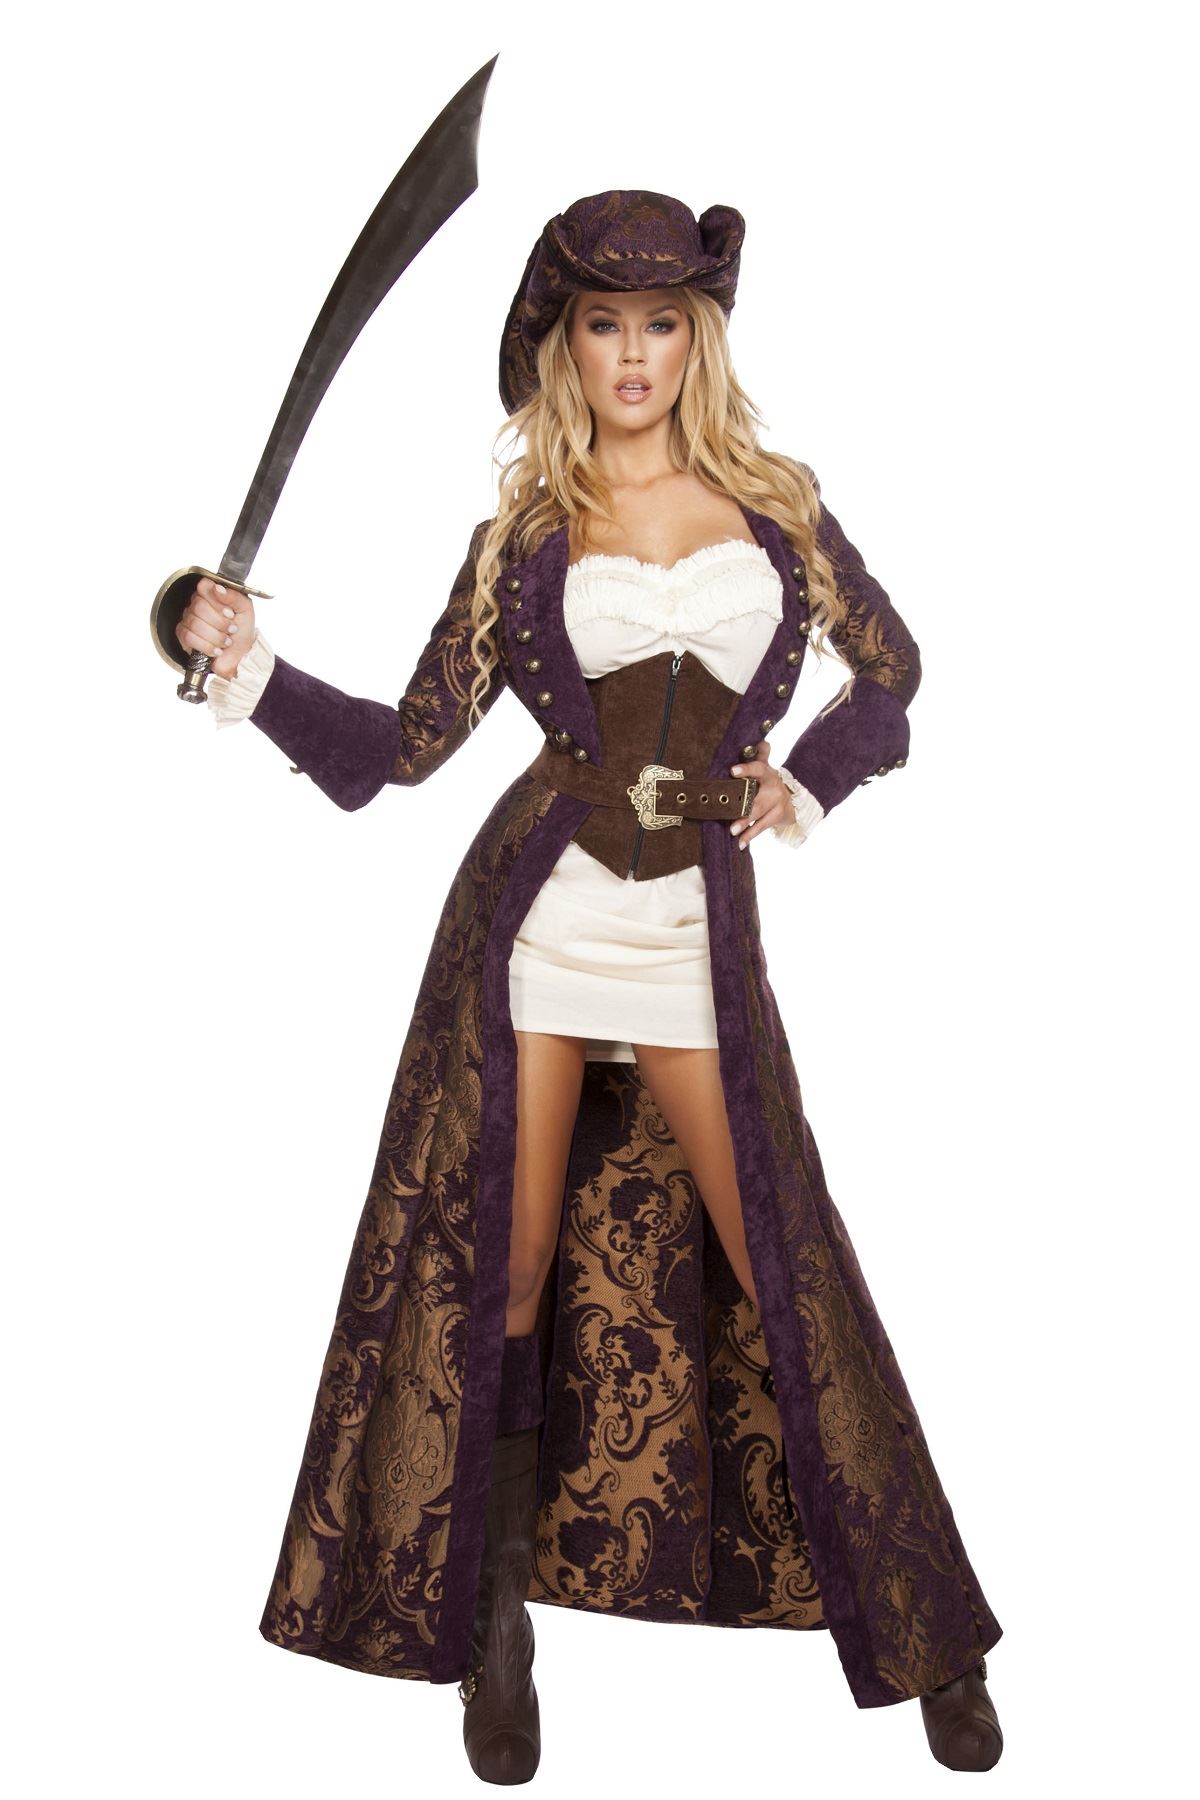 Adult Decadent Pirate Diva Woman Deluxe Costume 22999 The Costume Land 1759